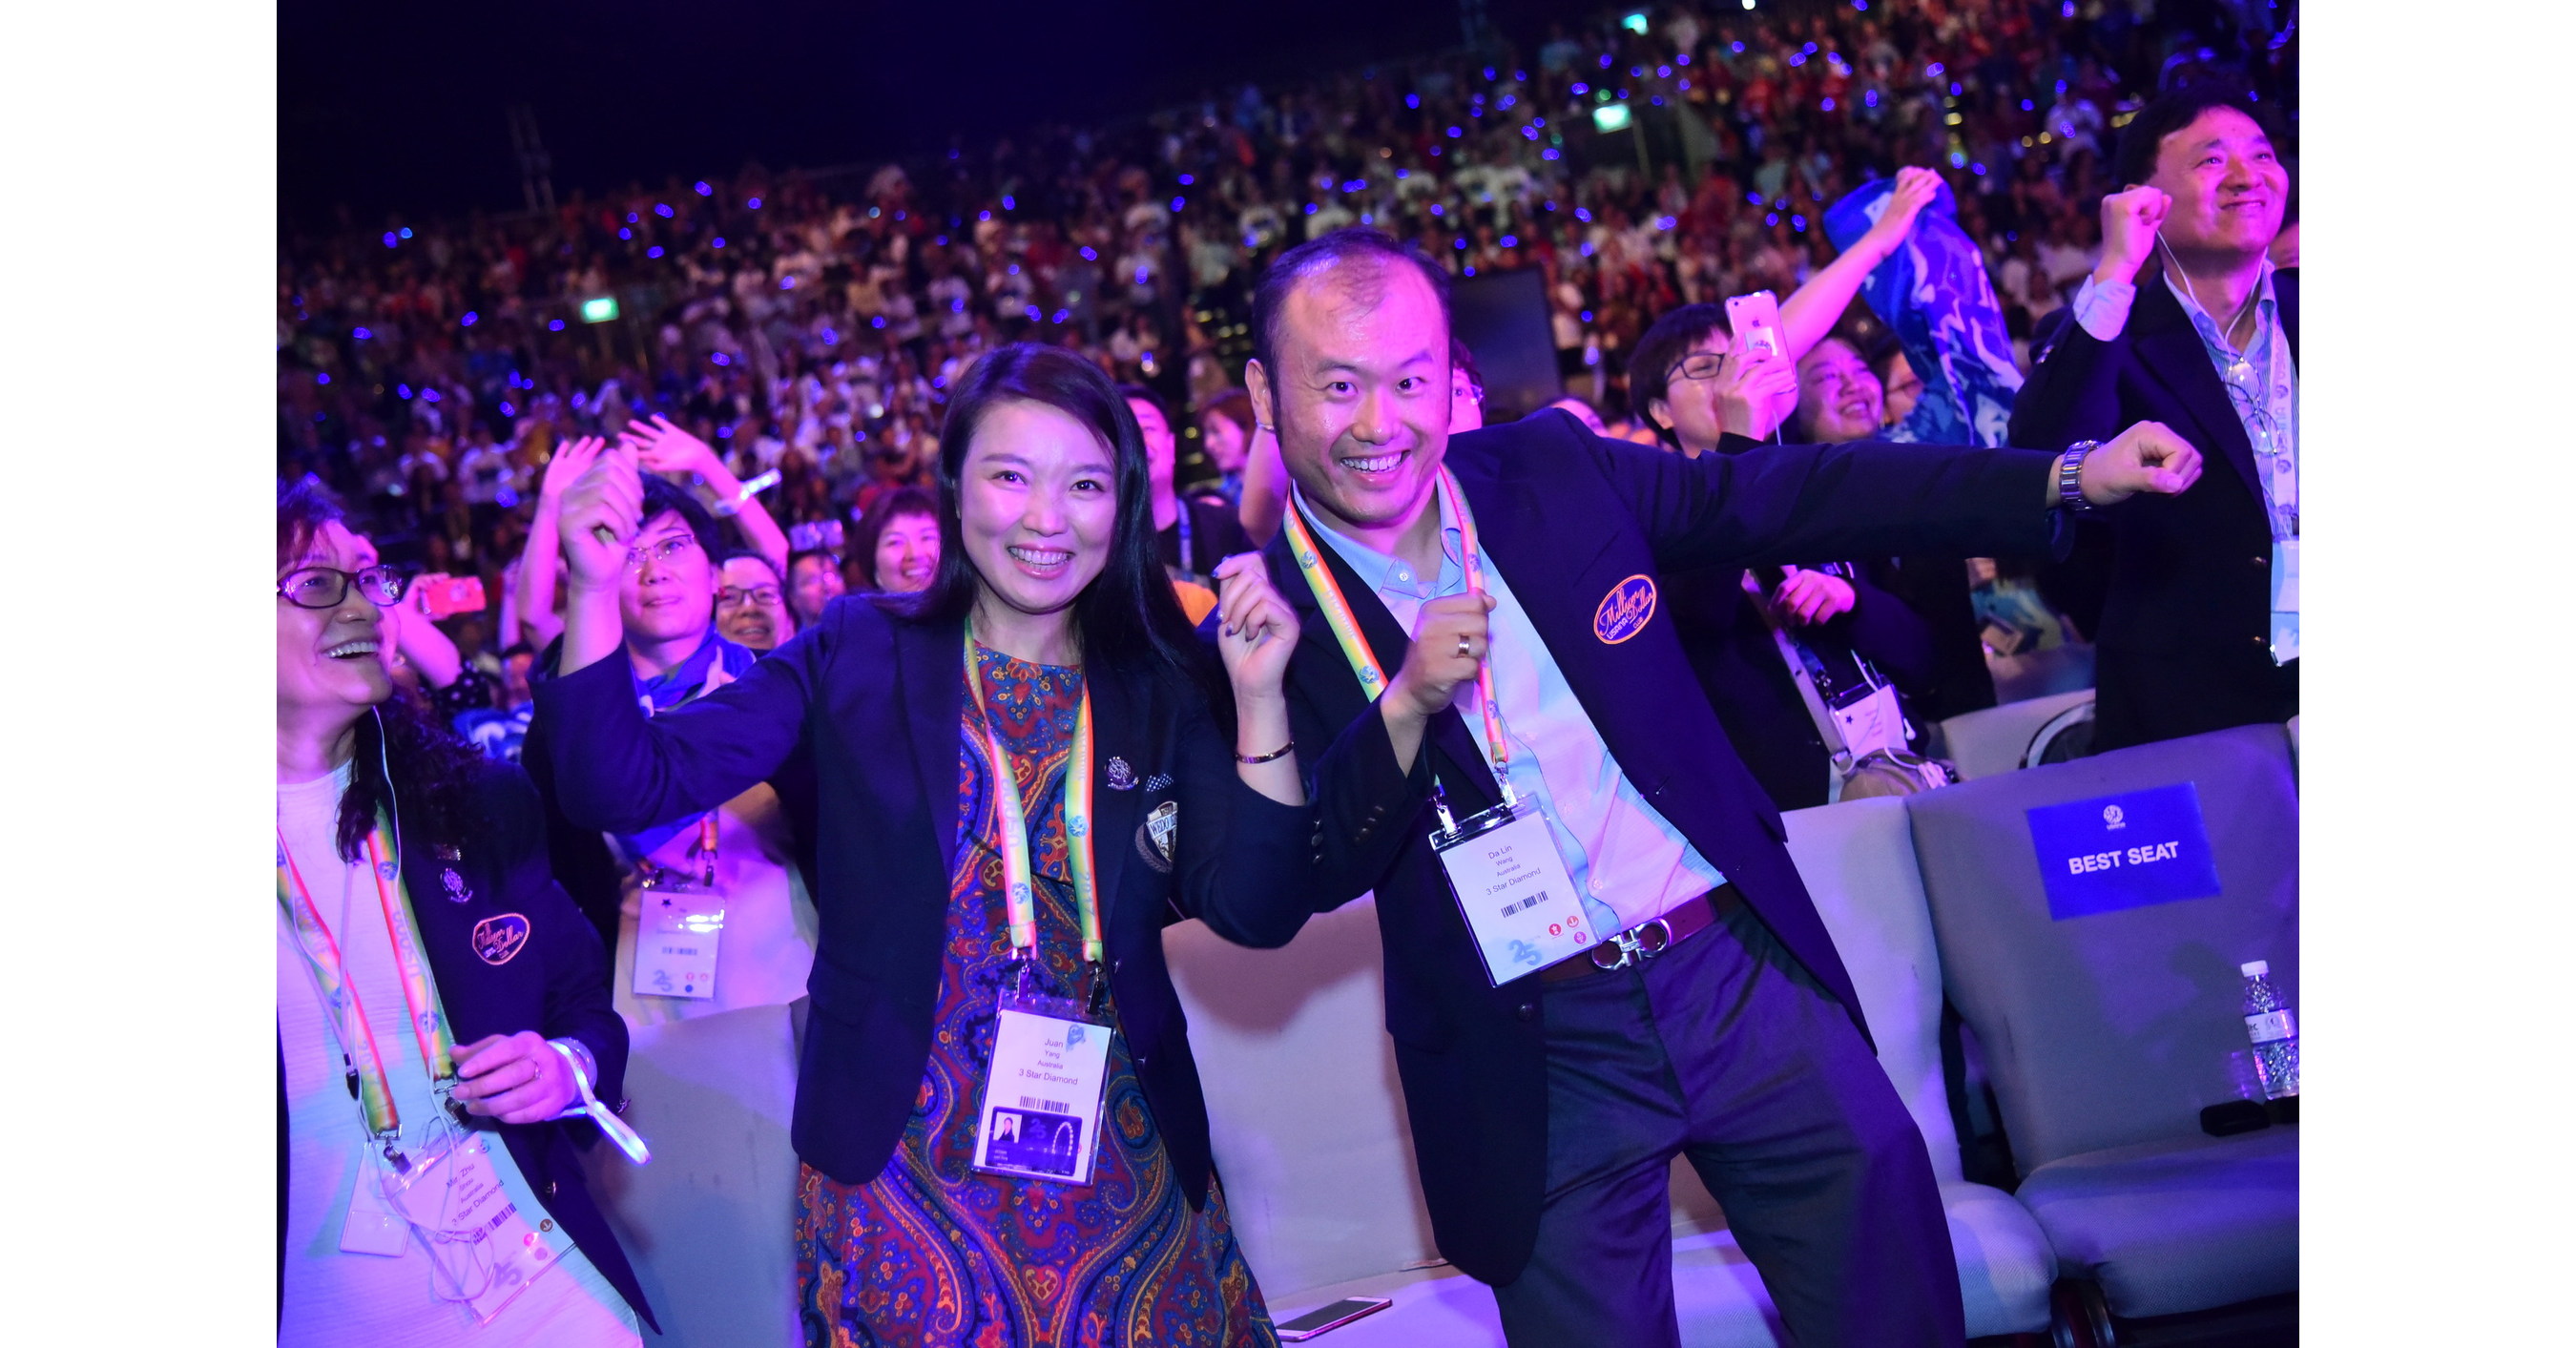 USANA Proudly Celebrates Its 25th Anniversary At Annual AsiaPacific